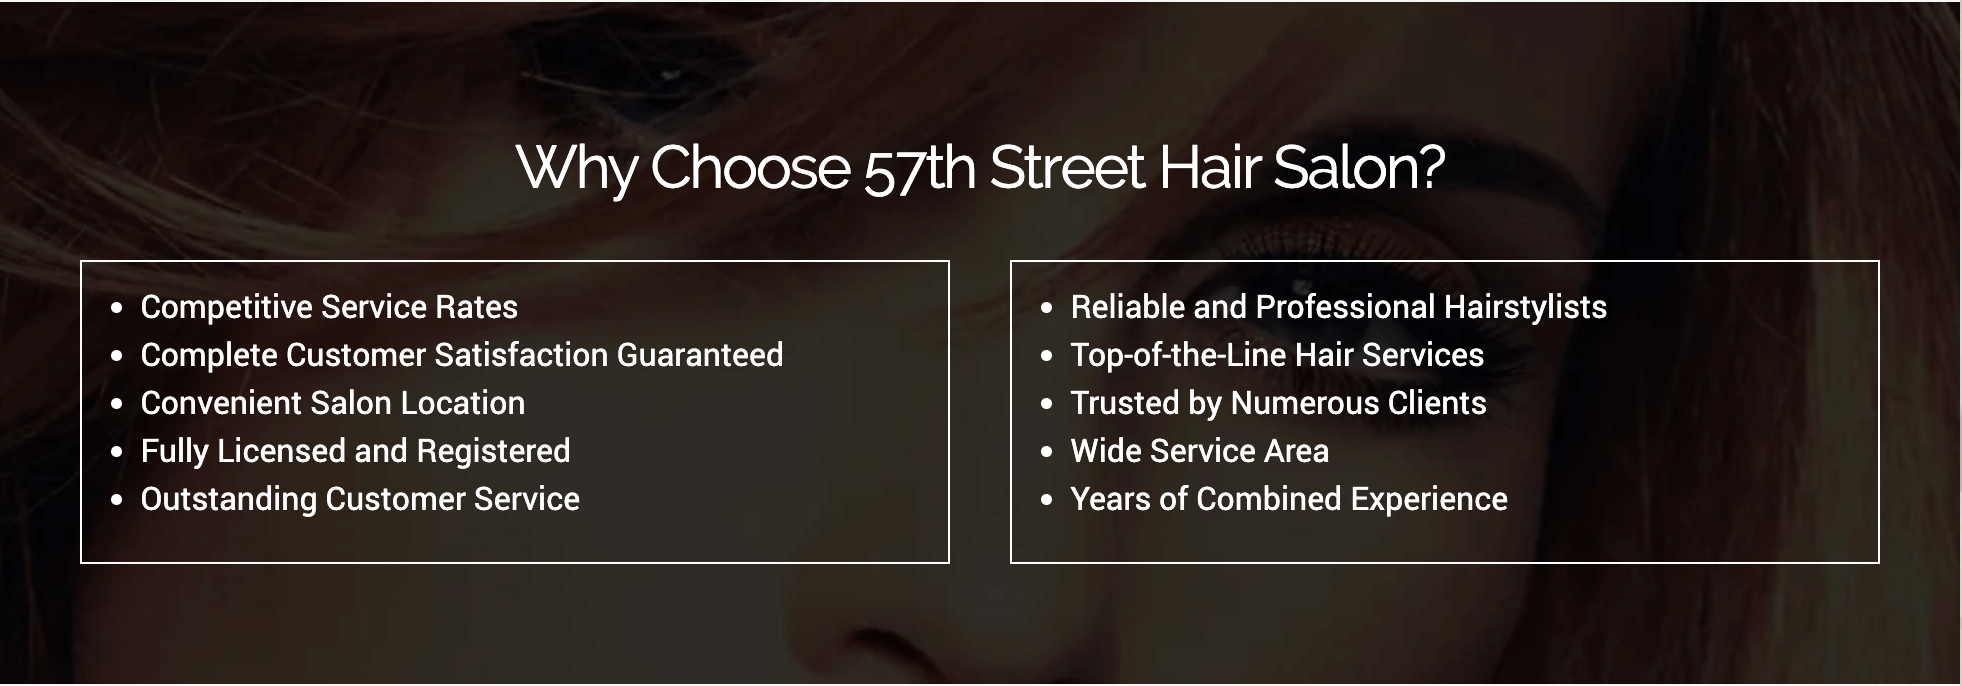 57th Street Hair Salon's about page